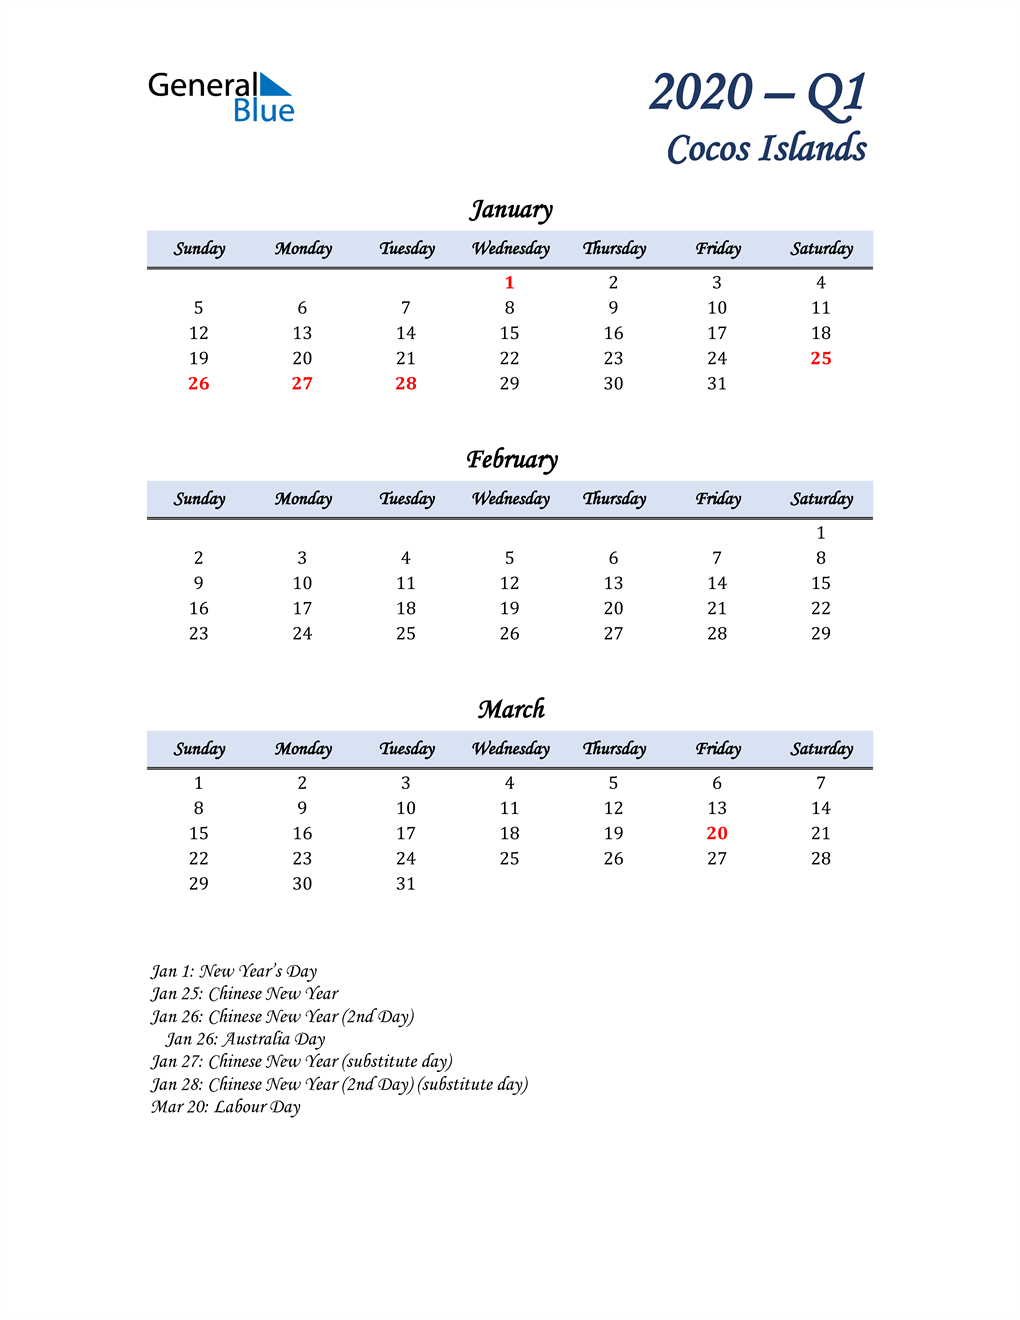  January, February, and March Calendar for Cocos Islands